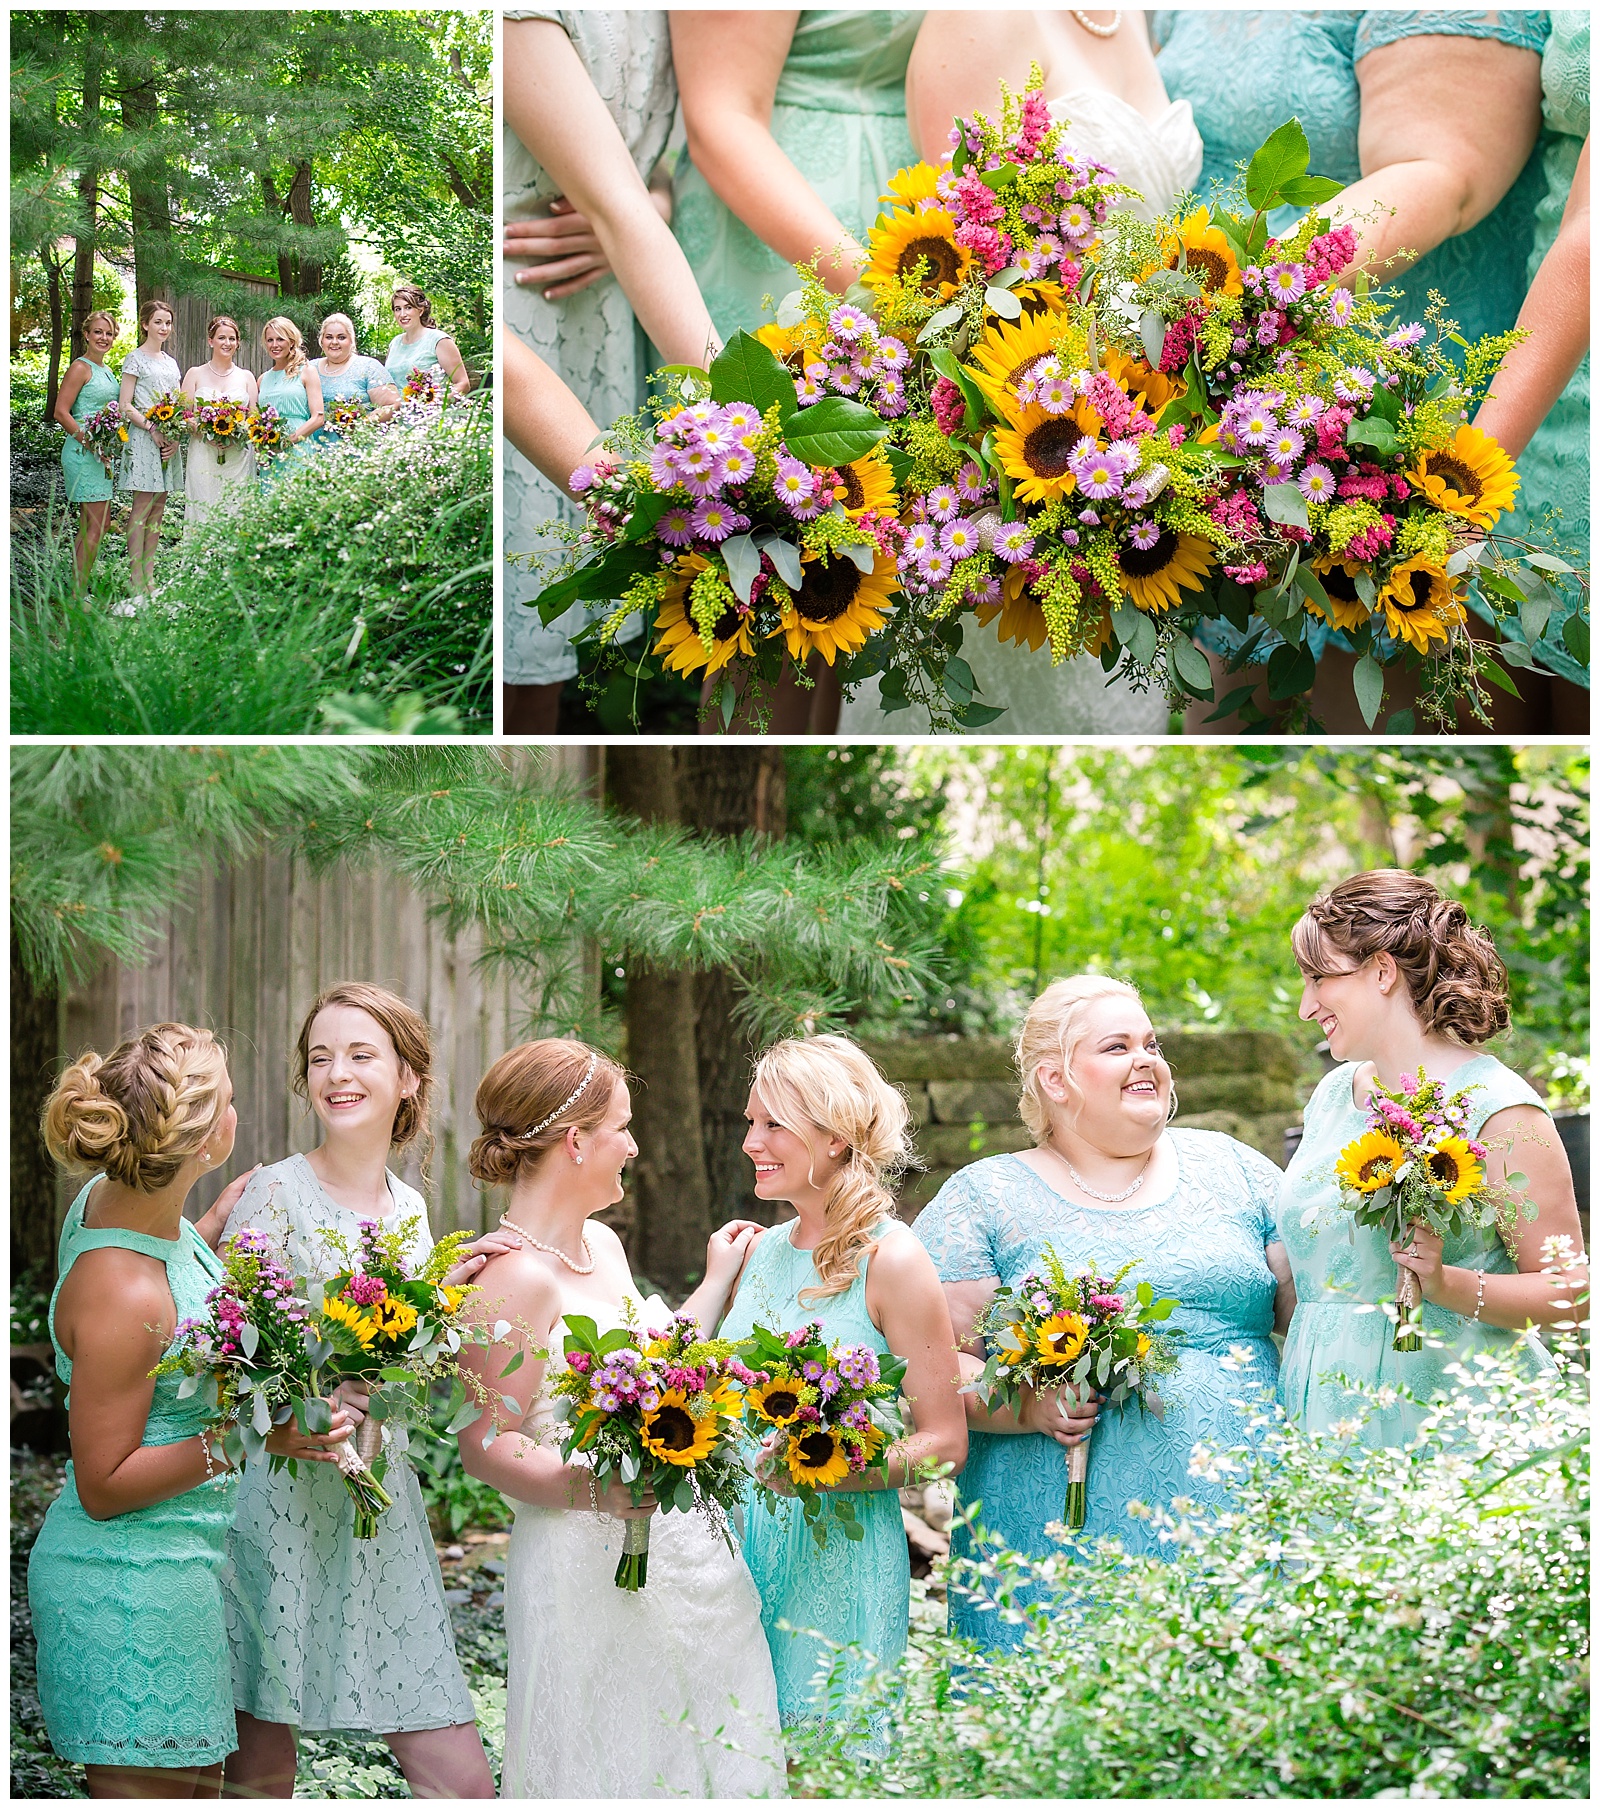 Wedding photography at The Halcyon House in Lawrence, Kansas.